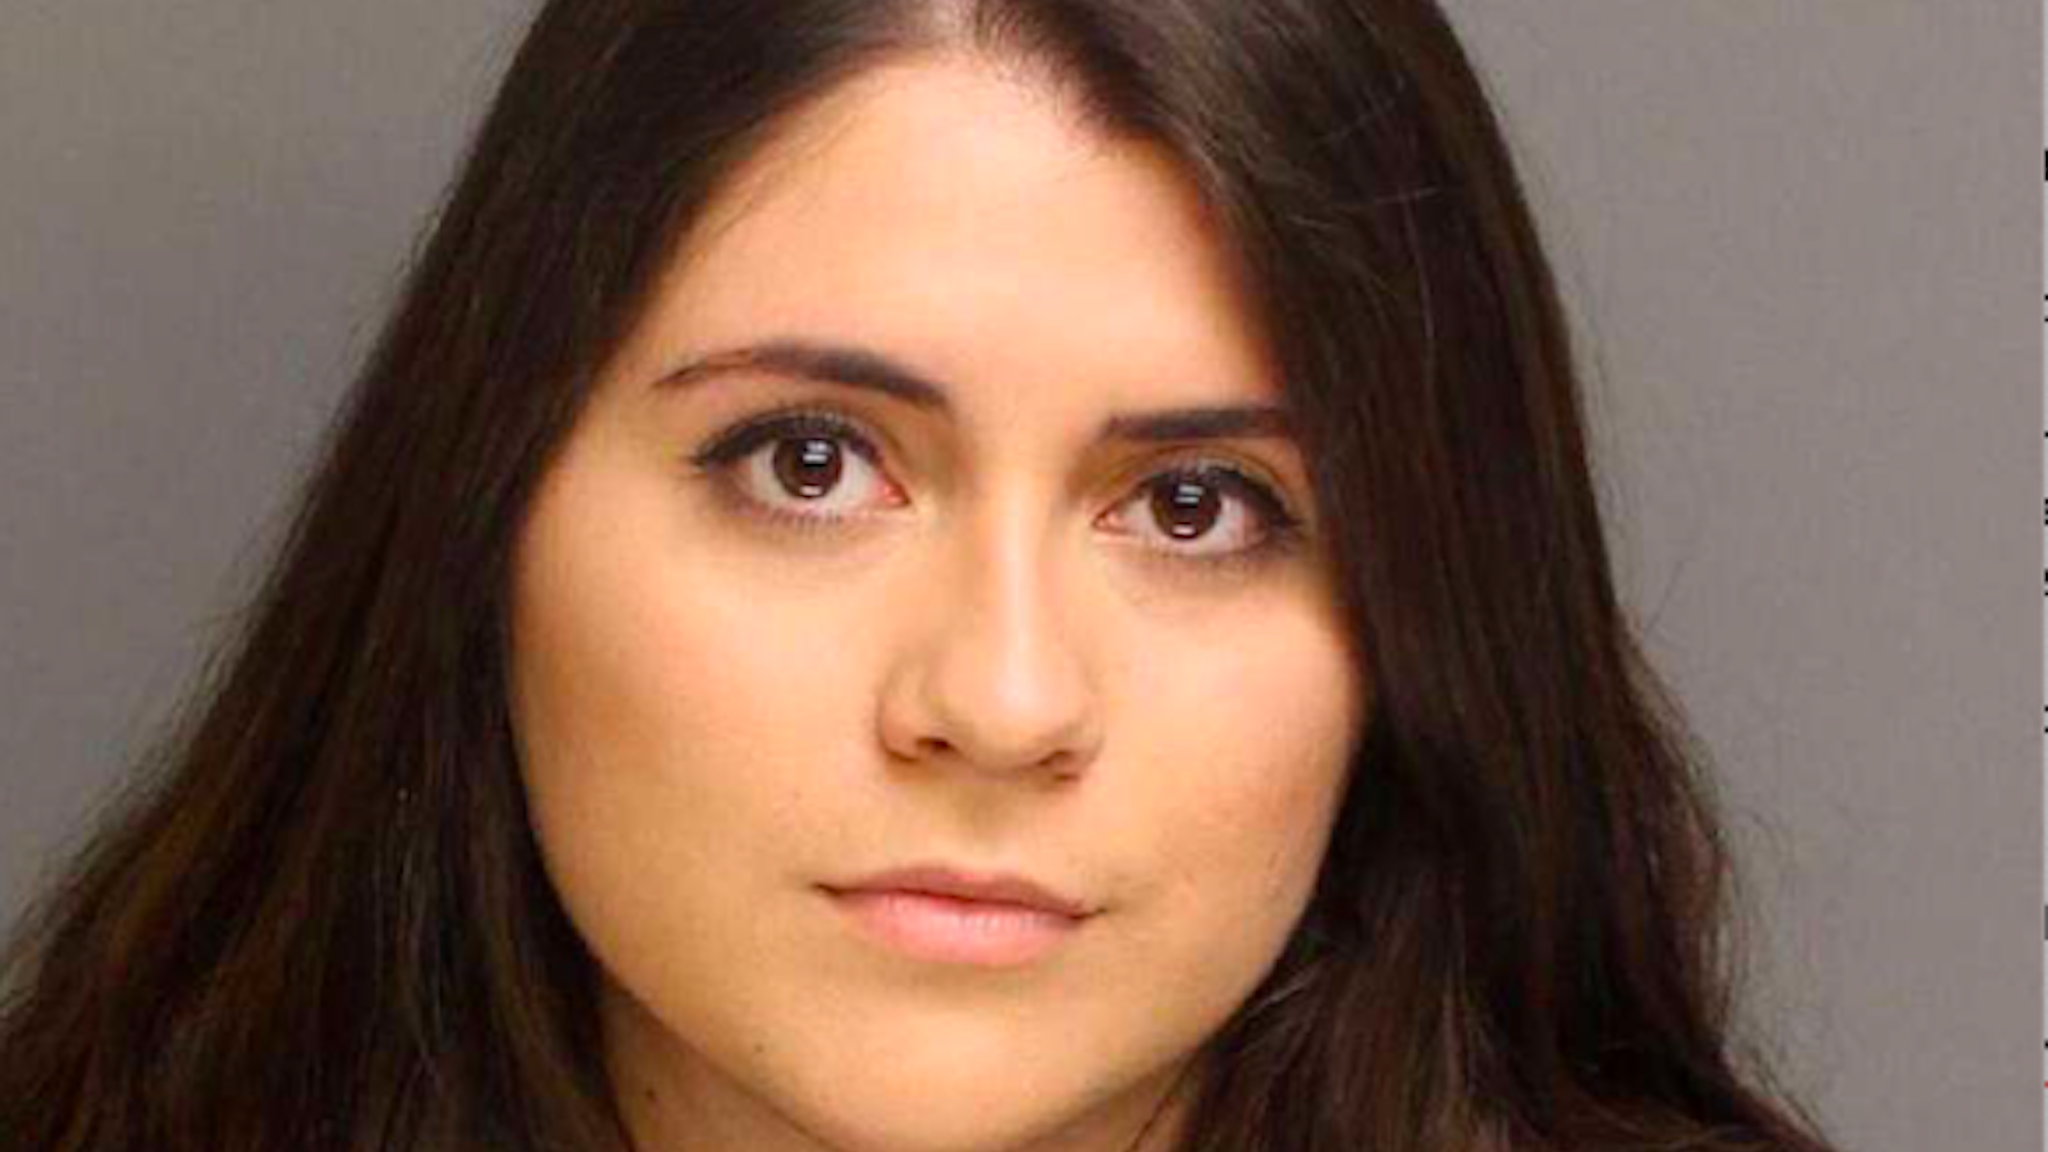 Nikki Yovino admitted to falsely accusing two Sacred Heart University football players of sexual assault.